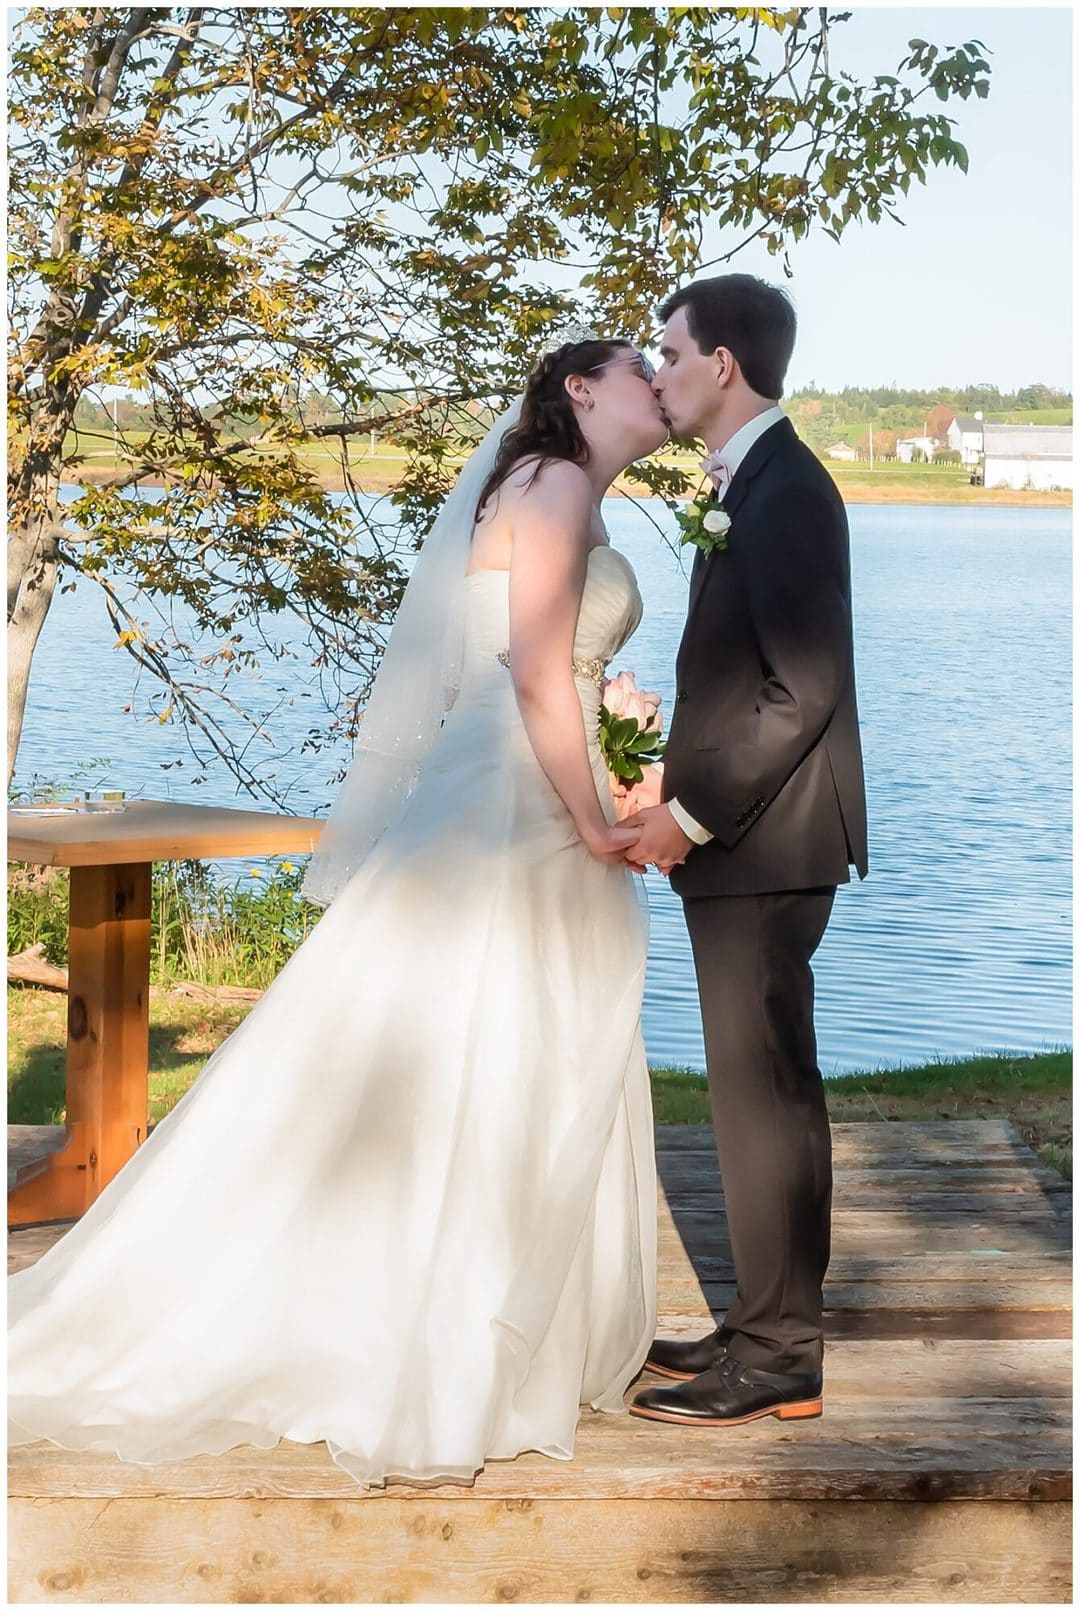 The bride and groom have their first kiss during their wedding ceremony at Kinley Farm in Lunenburg, NS.